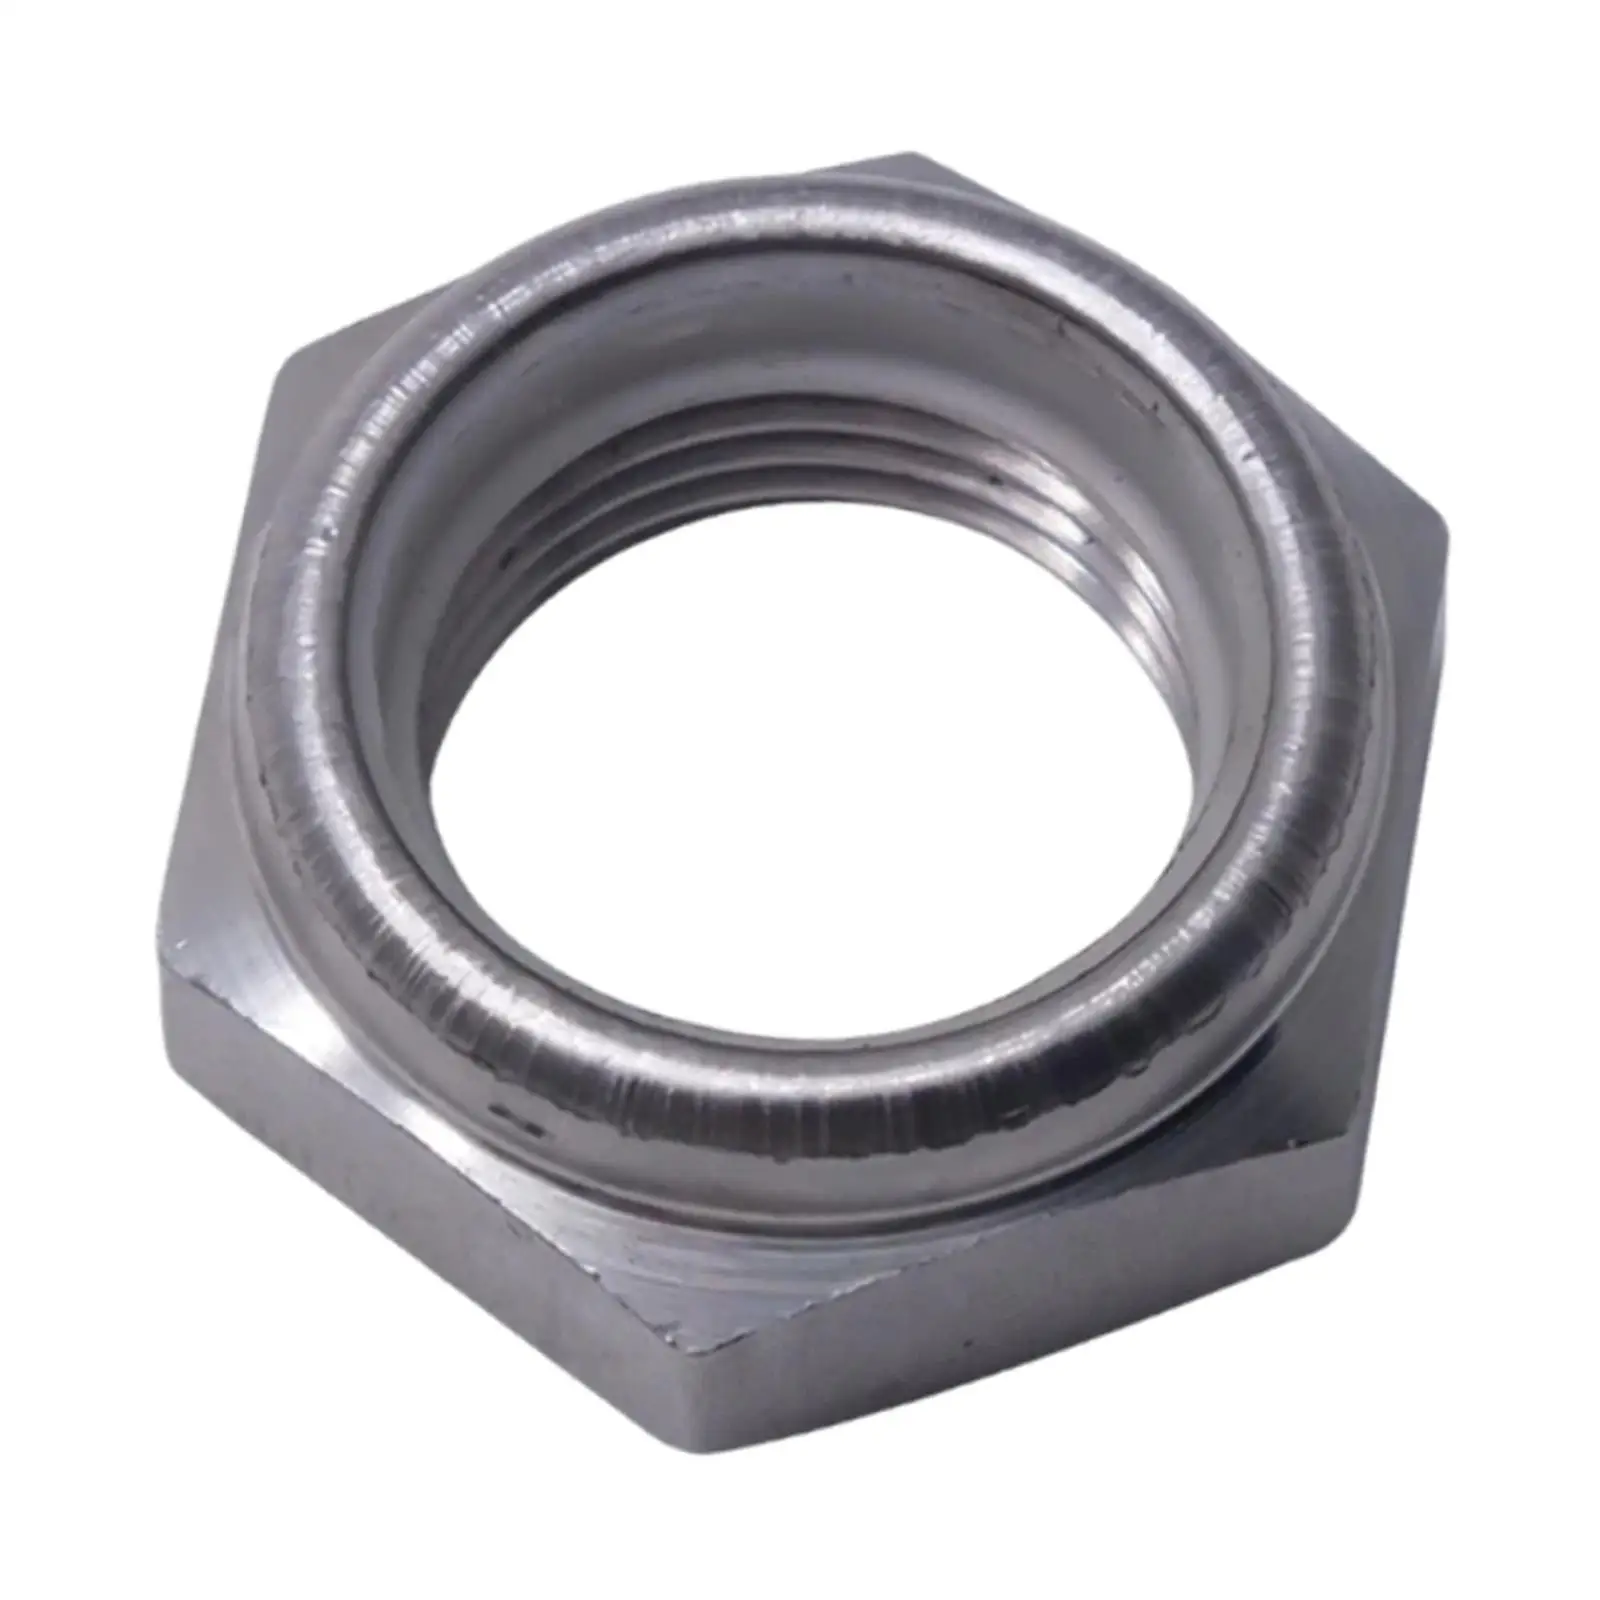 Replacement Self Locking Nut 90185-22043 90185-22043-00 for Yamaha